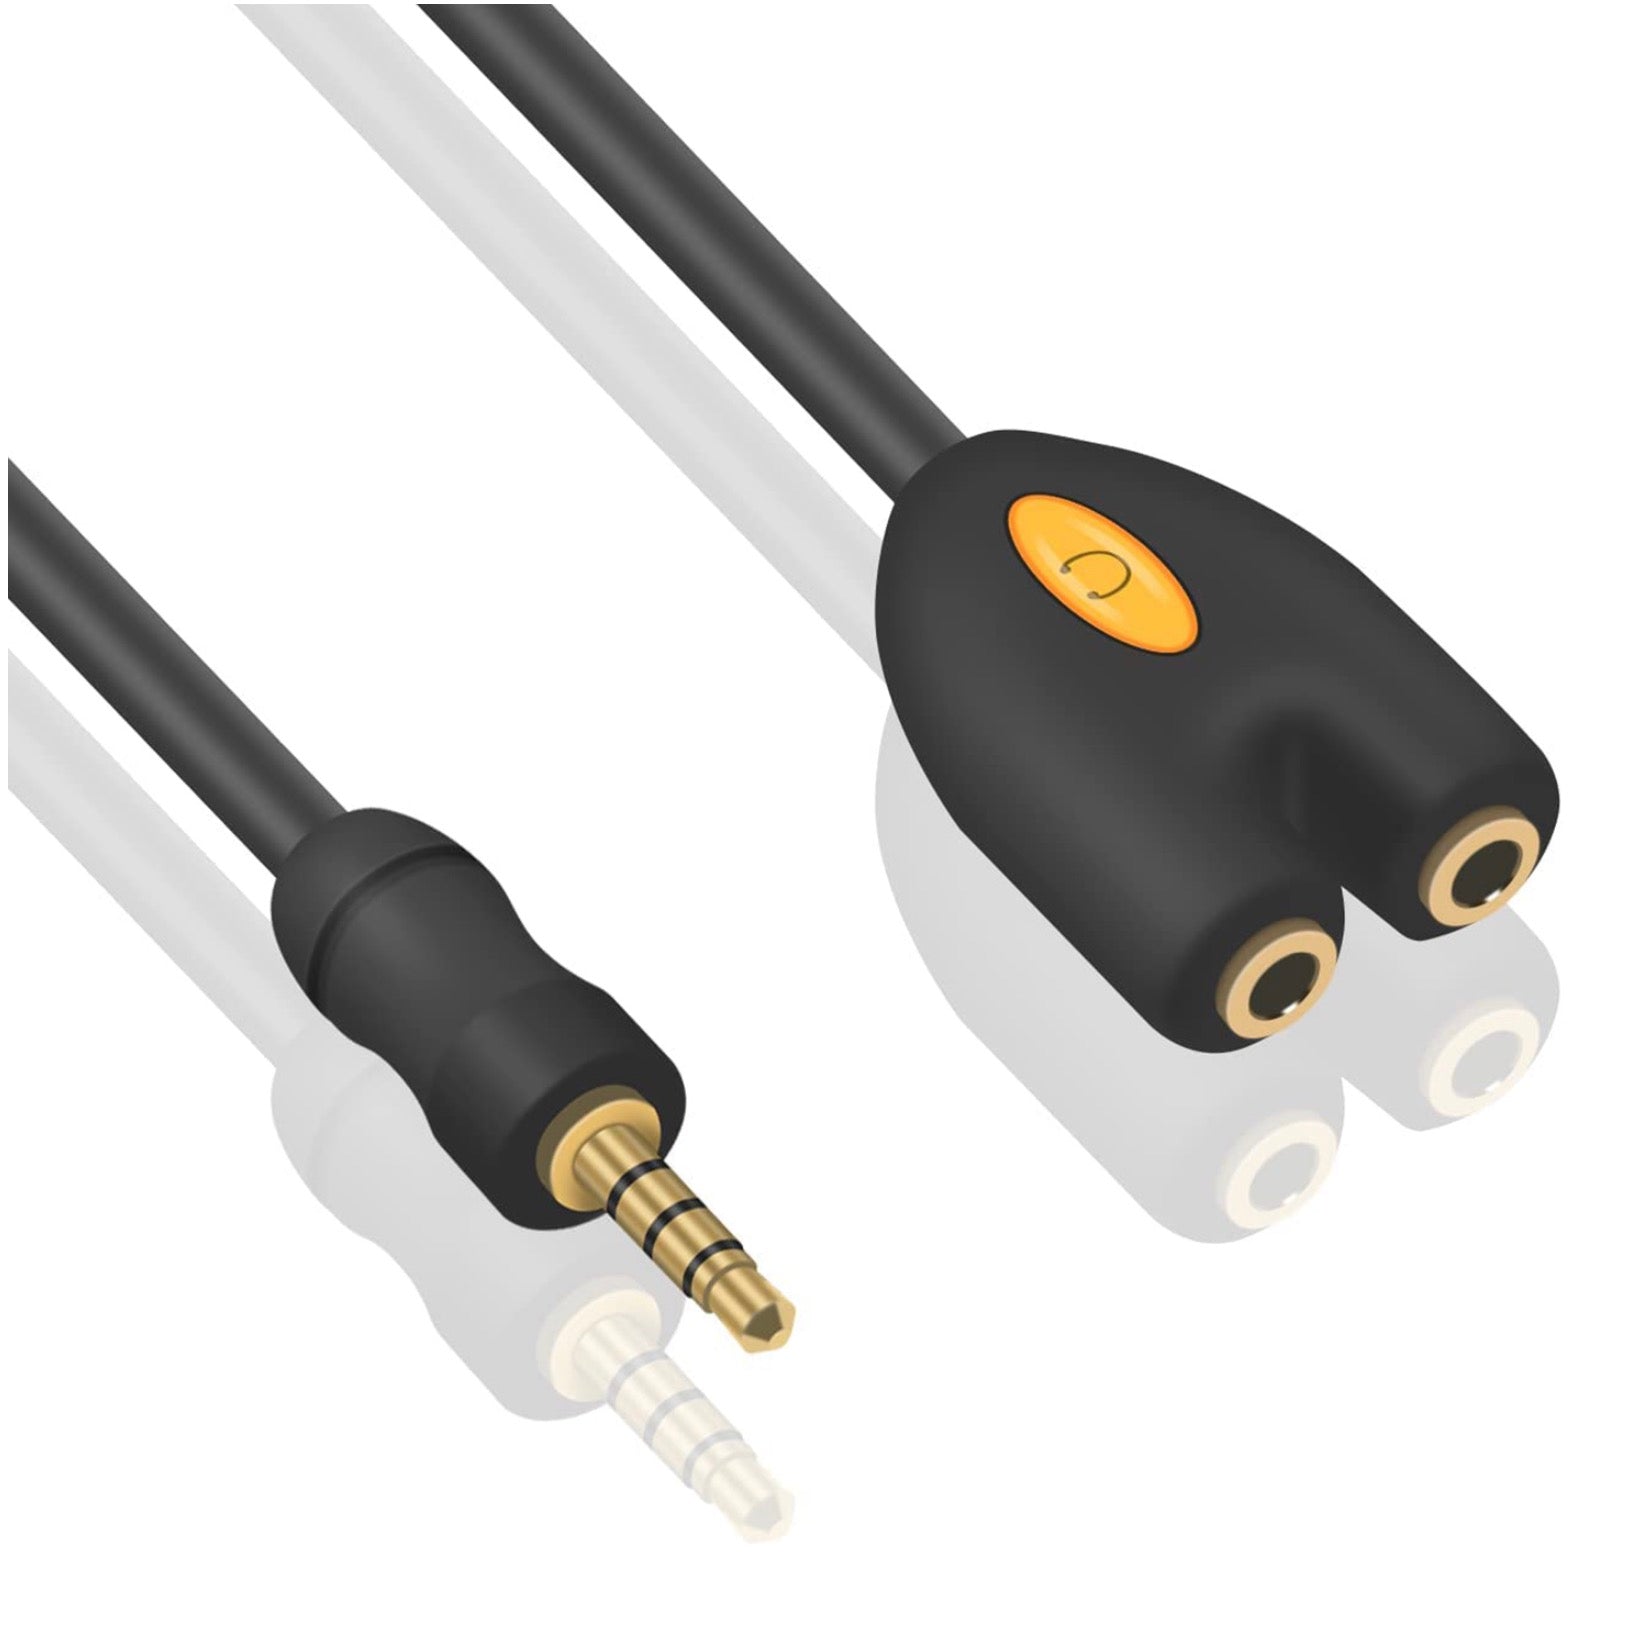 3.5mm 4Pole TRRS Male to Dual 3.5mm Female Headset Splitter Headphone Cable